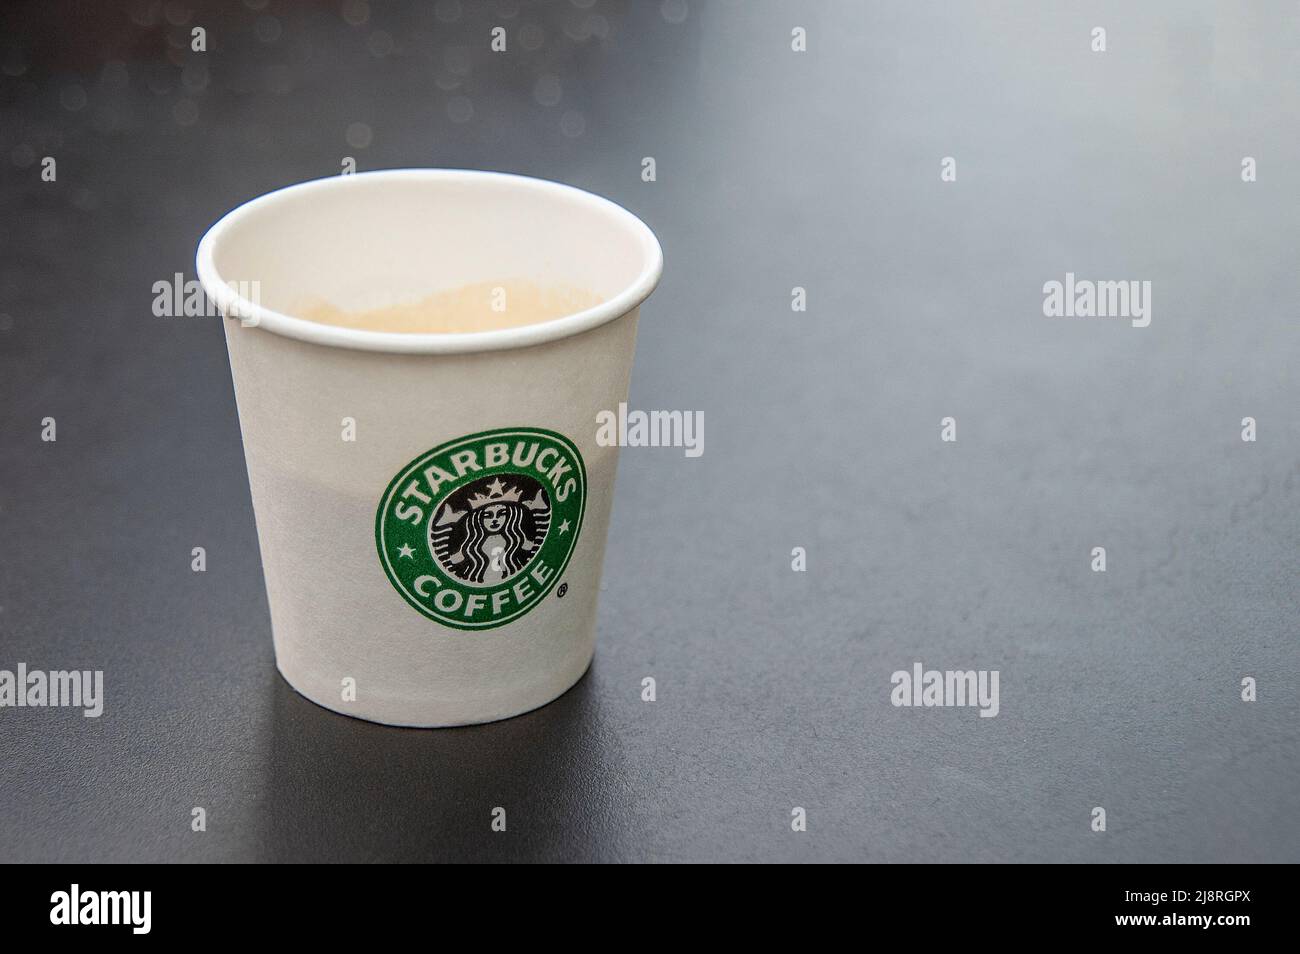 London, UK - May 18, 2022 - Starbucks espresso in paper cup Stock Photo